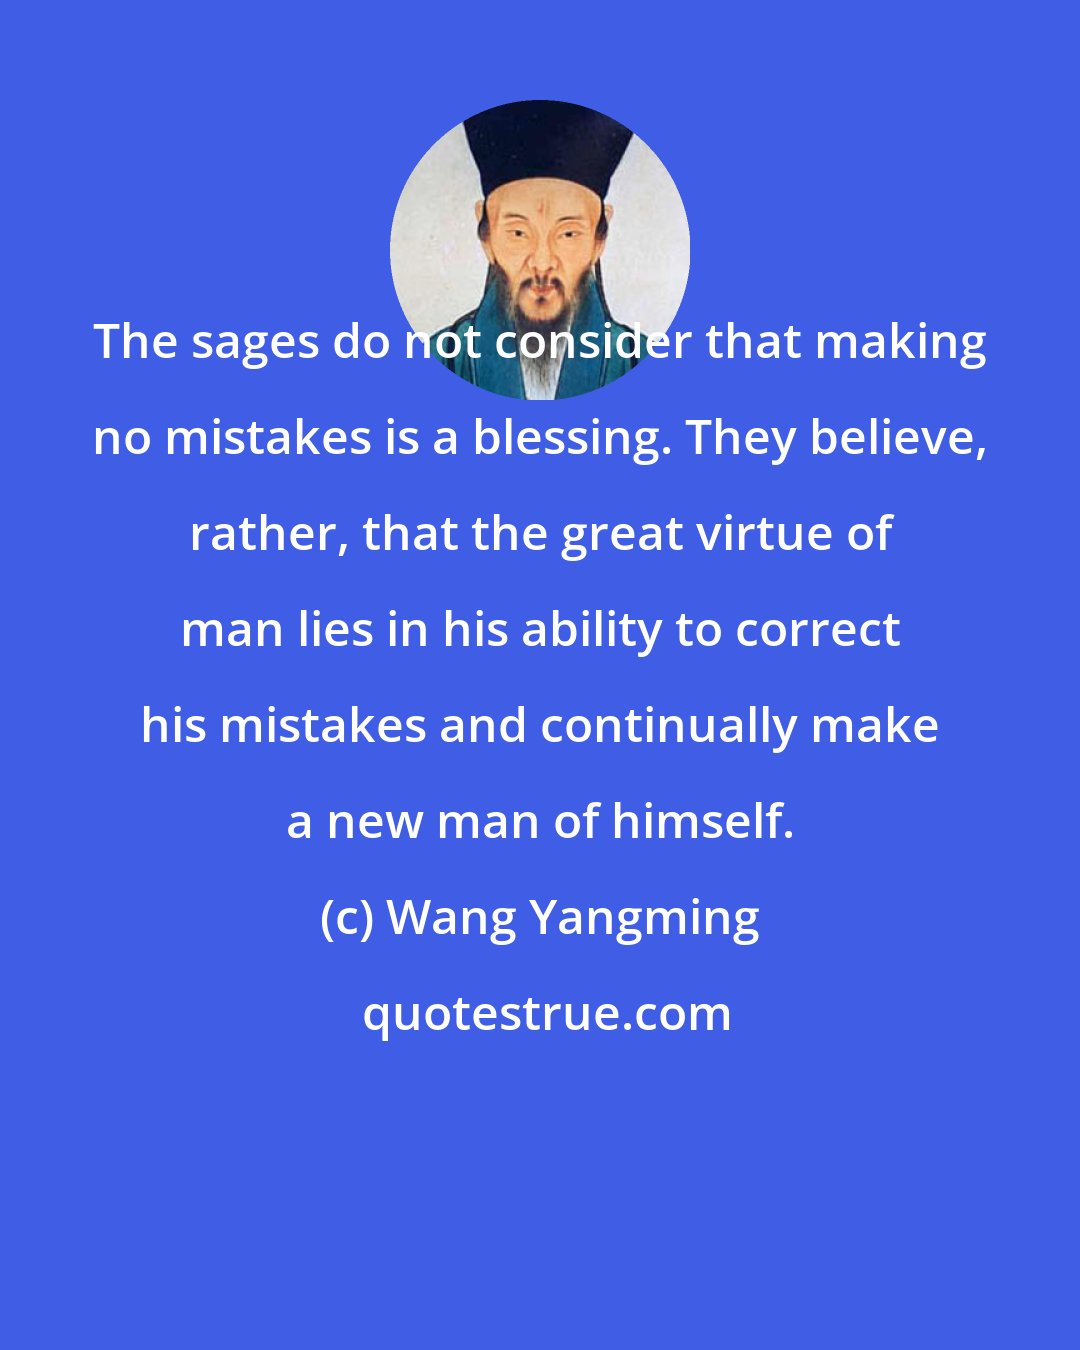 Wang Yangming: The sages do not consider that making no mistakes is a blessing. They believe, rather, that the great virtue of man lies in his ability to correct his mistakes and continually make a new man of himself.